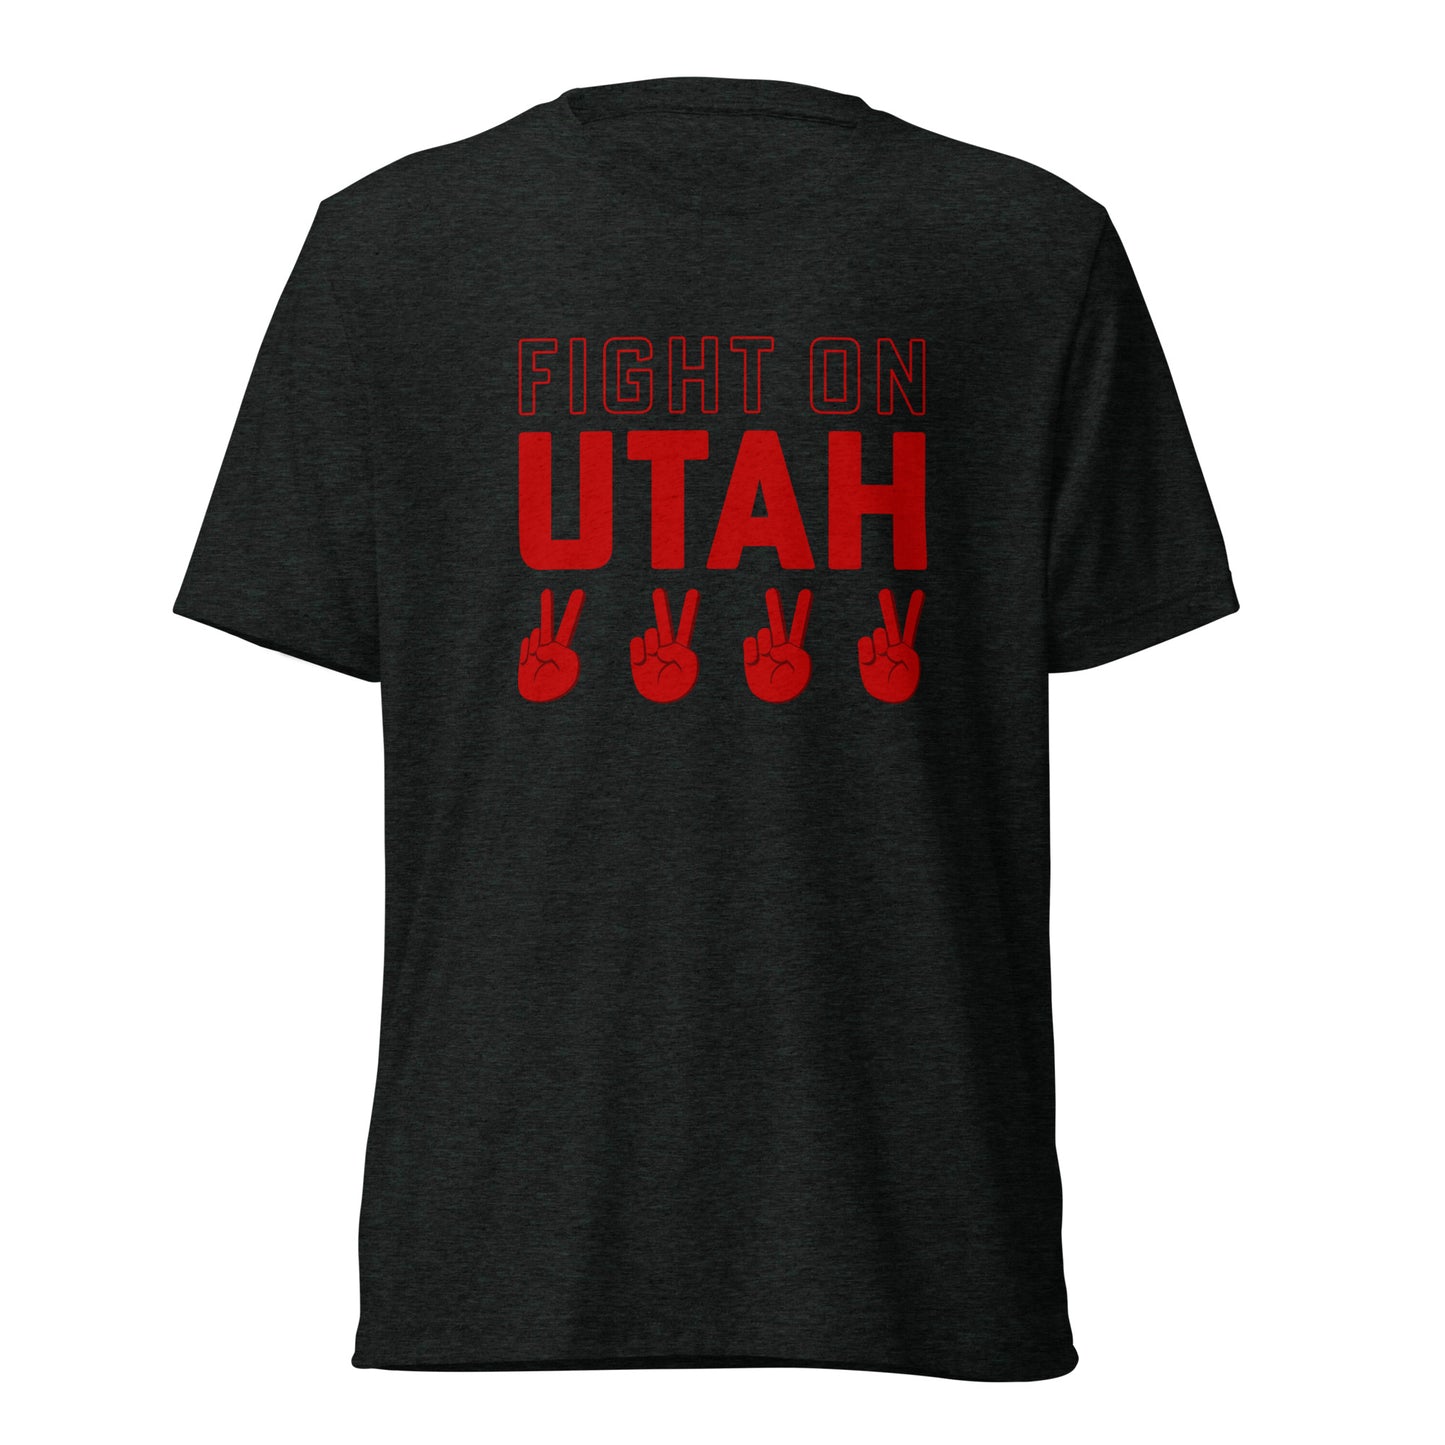 Premium Everyday Fight On Utah 4 In A Row ✌️ Simple USC Tee